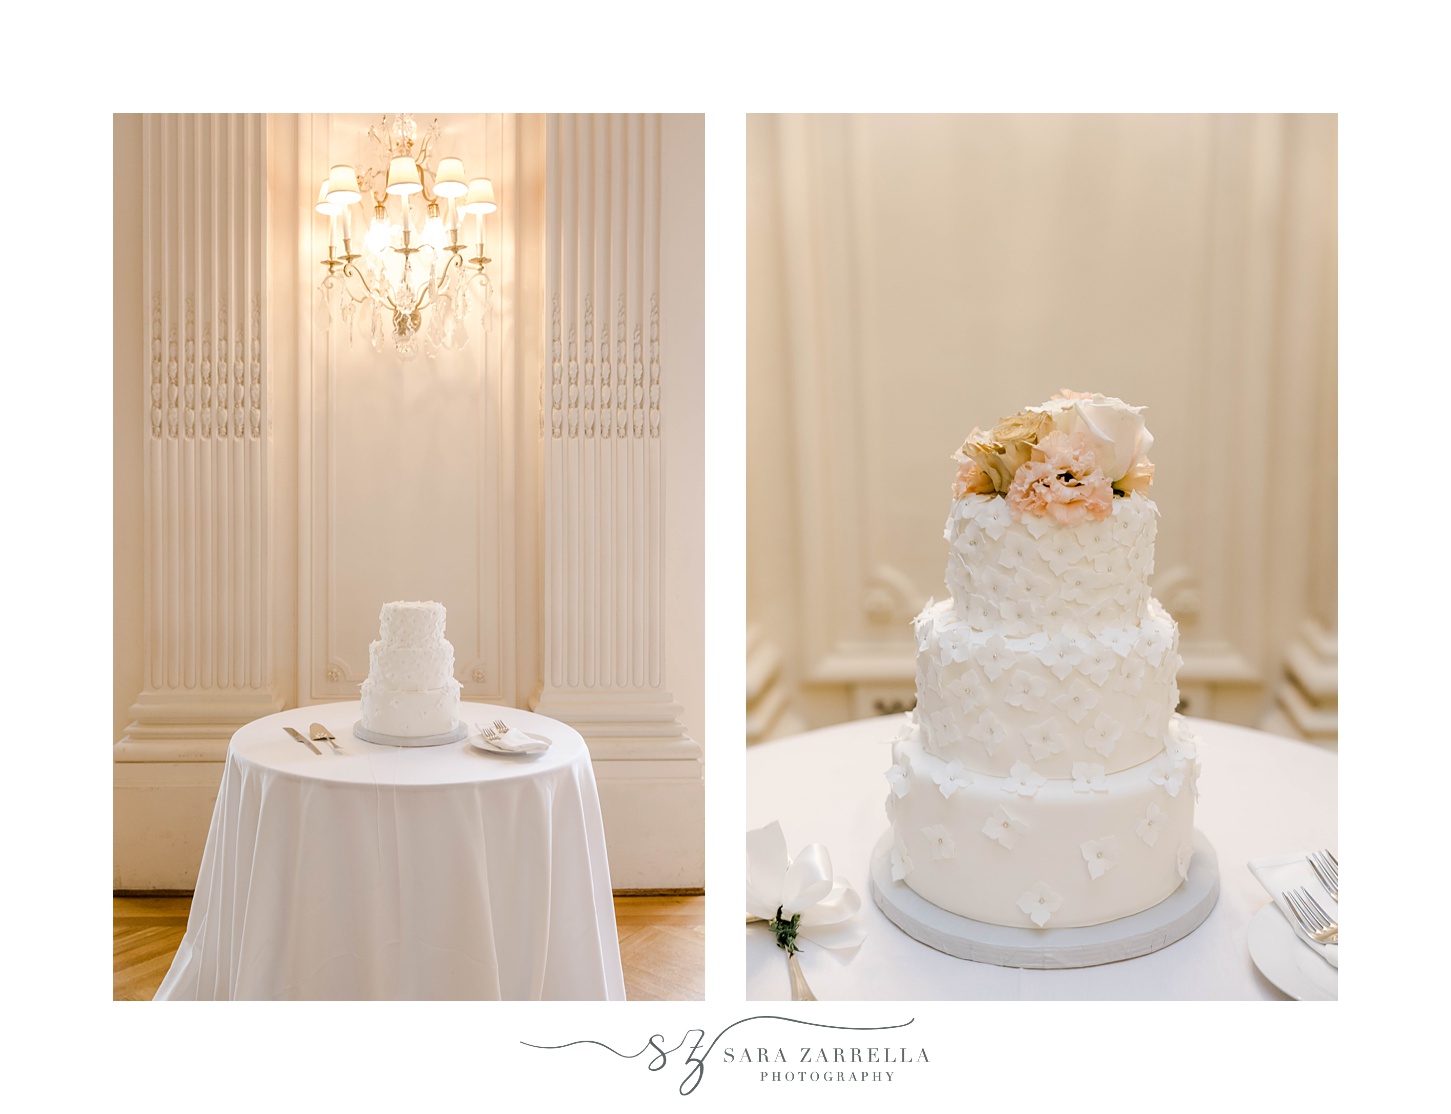 wedding cake display on table with white table cloth